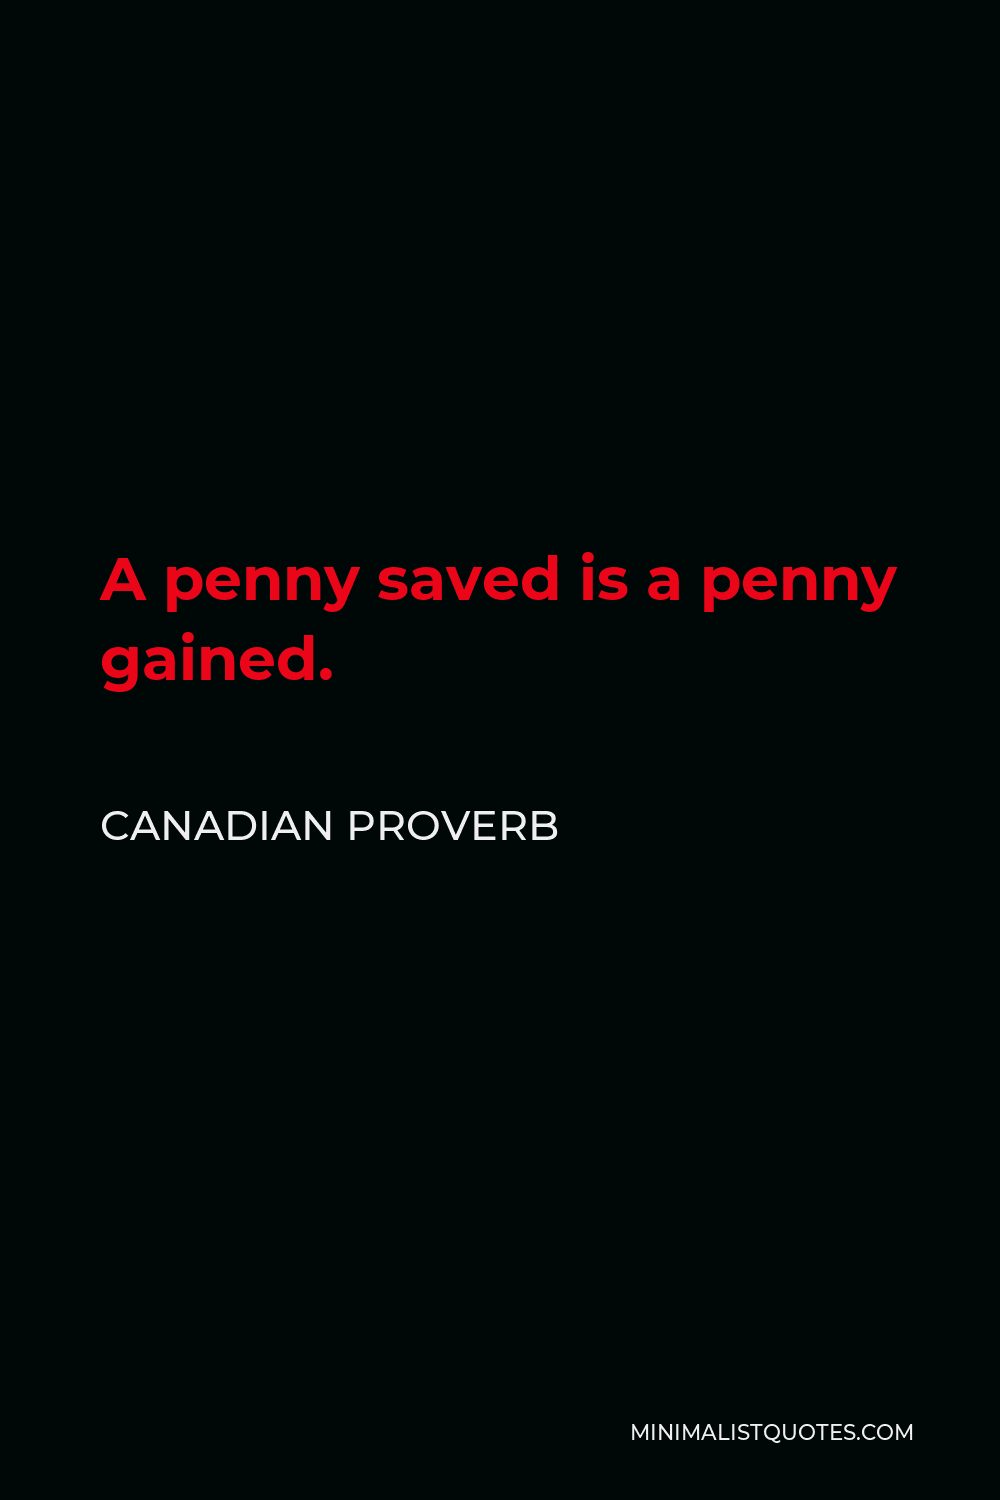 Canadian Proverb Quote - A penny saved is a penny gained.